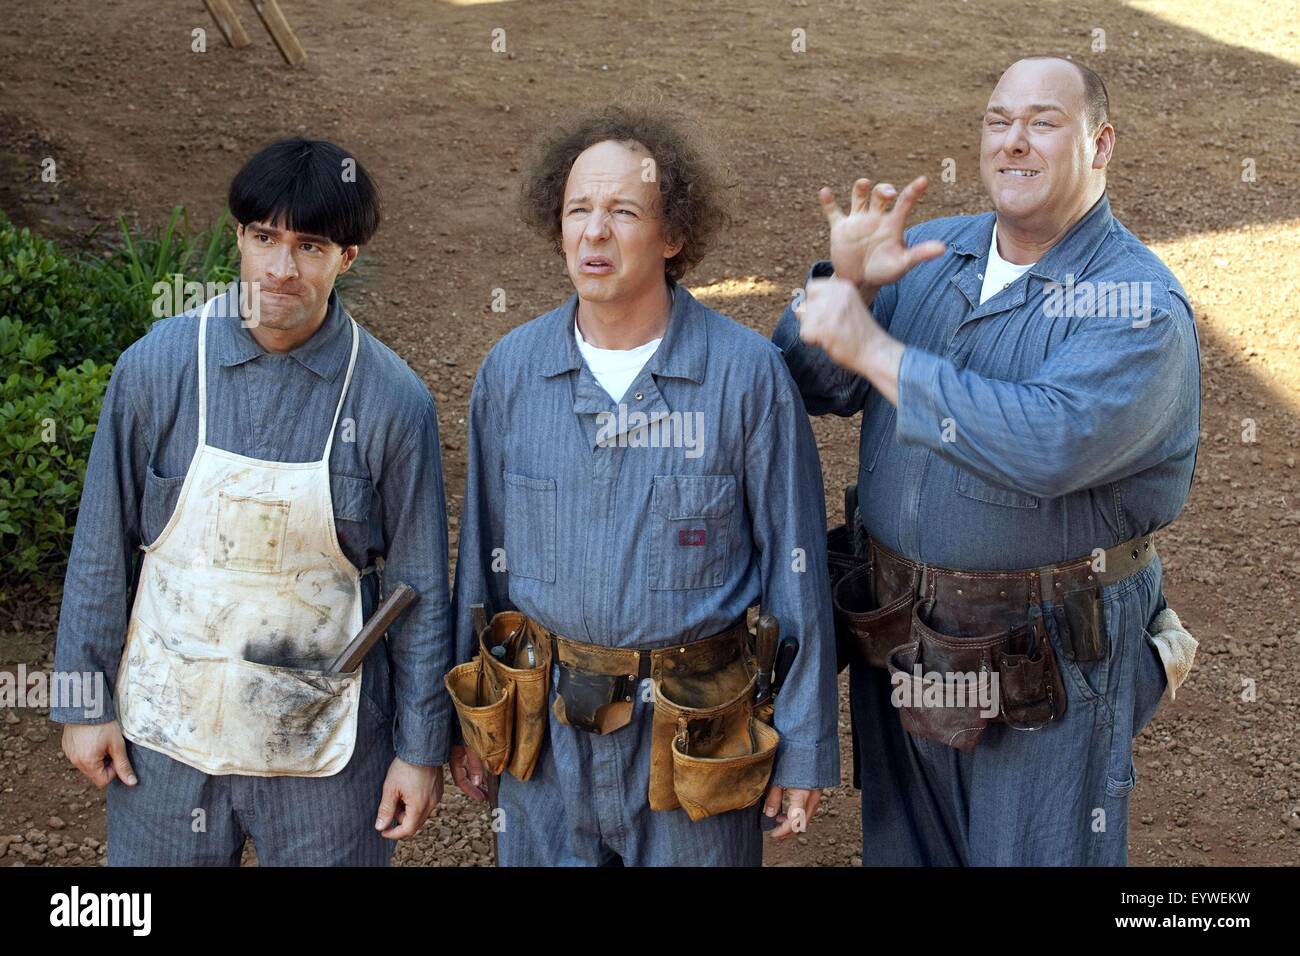 The Three Stooges ; Year : 2012 USA ; Director : Peter Farrelly, Bobby Farrelly ; Chris Diamantopoulos, Sean Hayes, Will Sasso Stock Photo